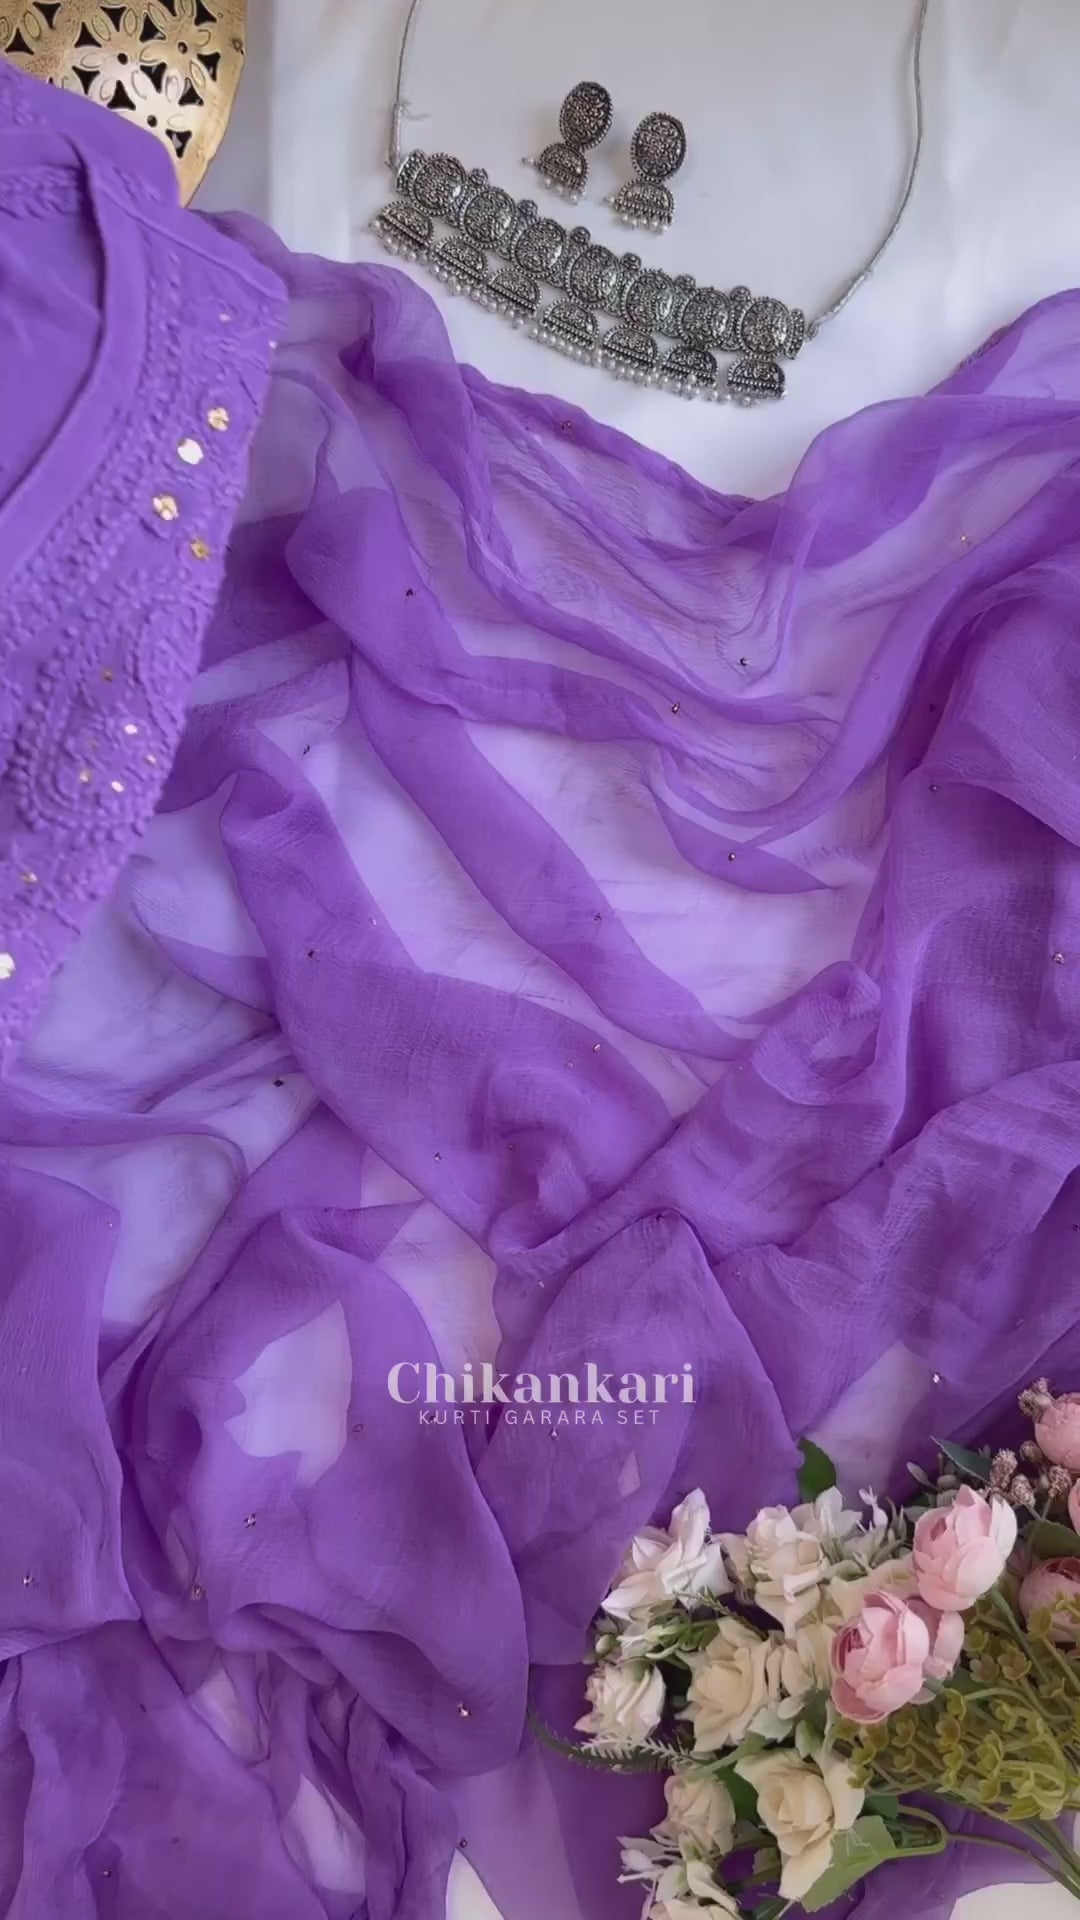 Buy chikankari kurti palazzo dupatta set online at best prices, Shop authentic Lucknow chikankari handmade kurta kurti palazzo dupatta set in viscose fabric for women 6